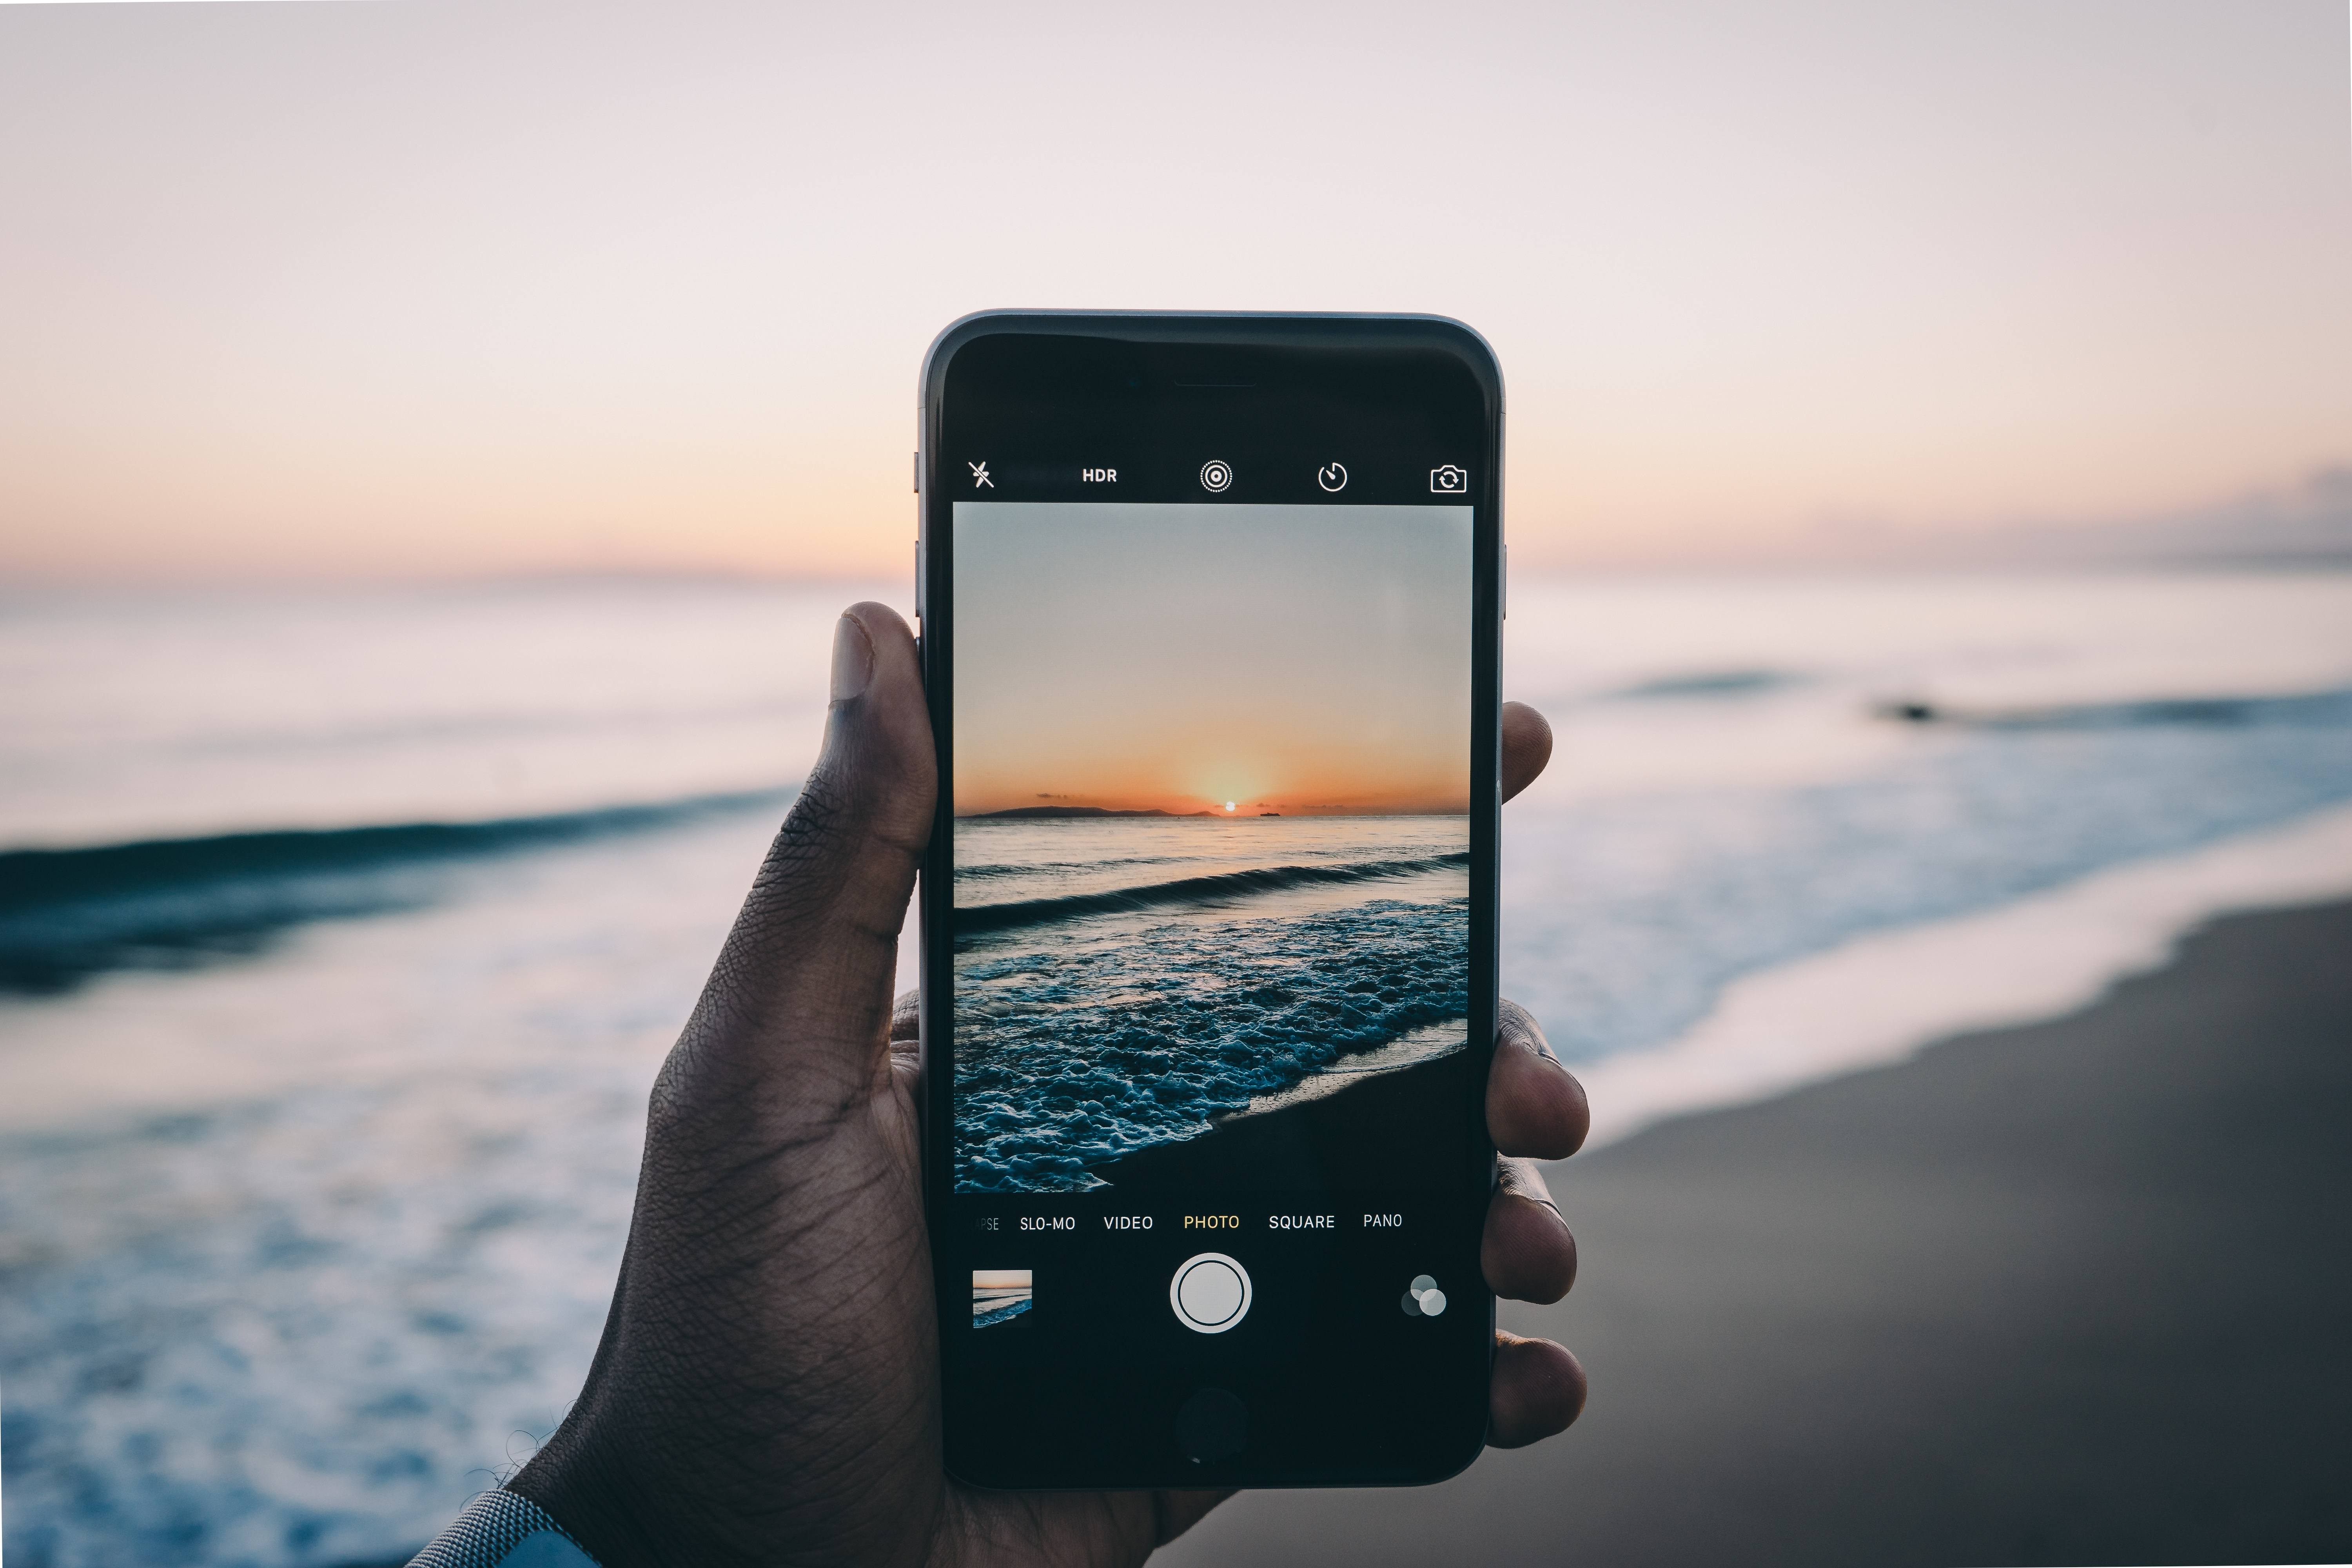 How to transfer photos from iPhone to iPhone [Easily]